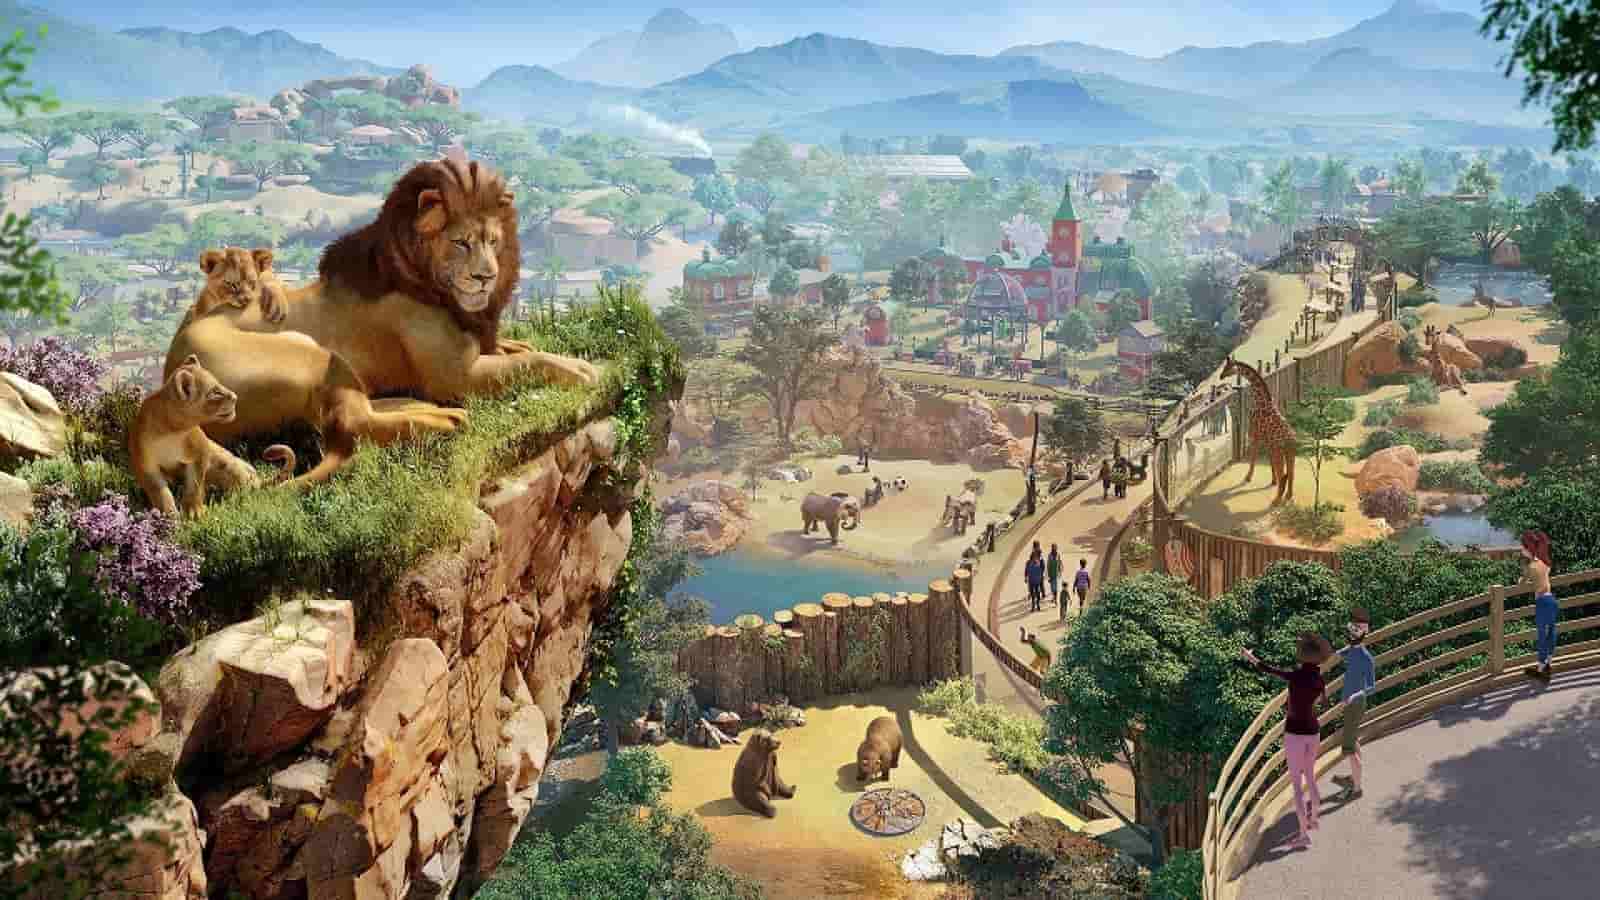 Is Planet Zoo Coming To PS4 Or PS5 In 2021? - PlayStation Universe